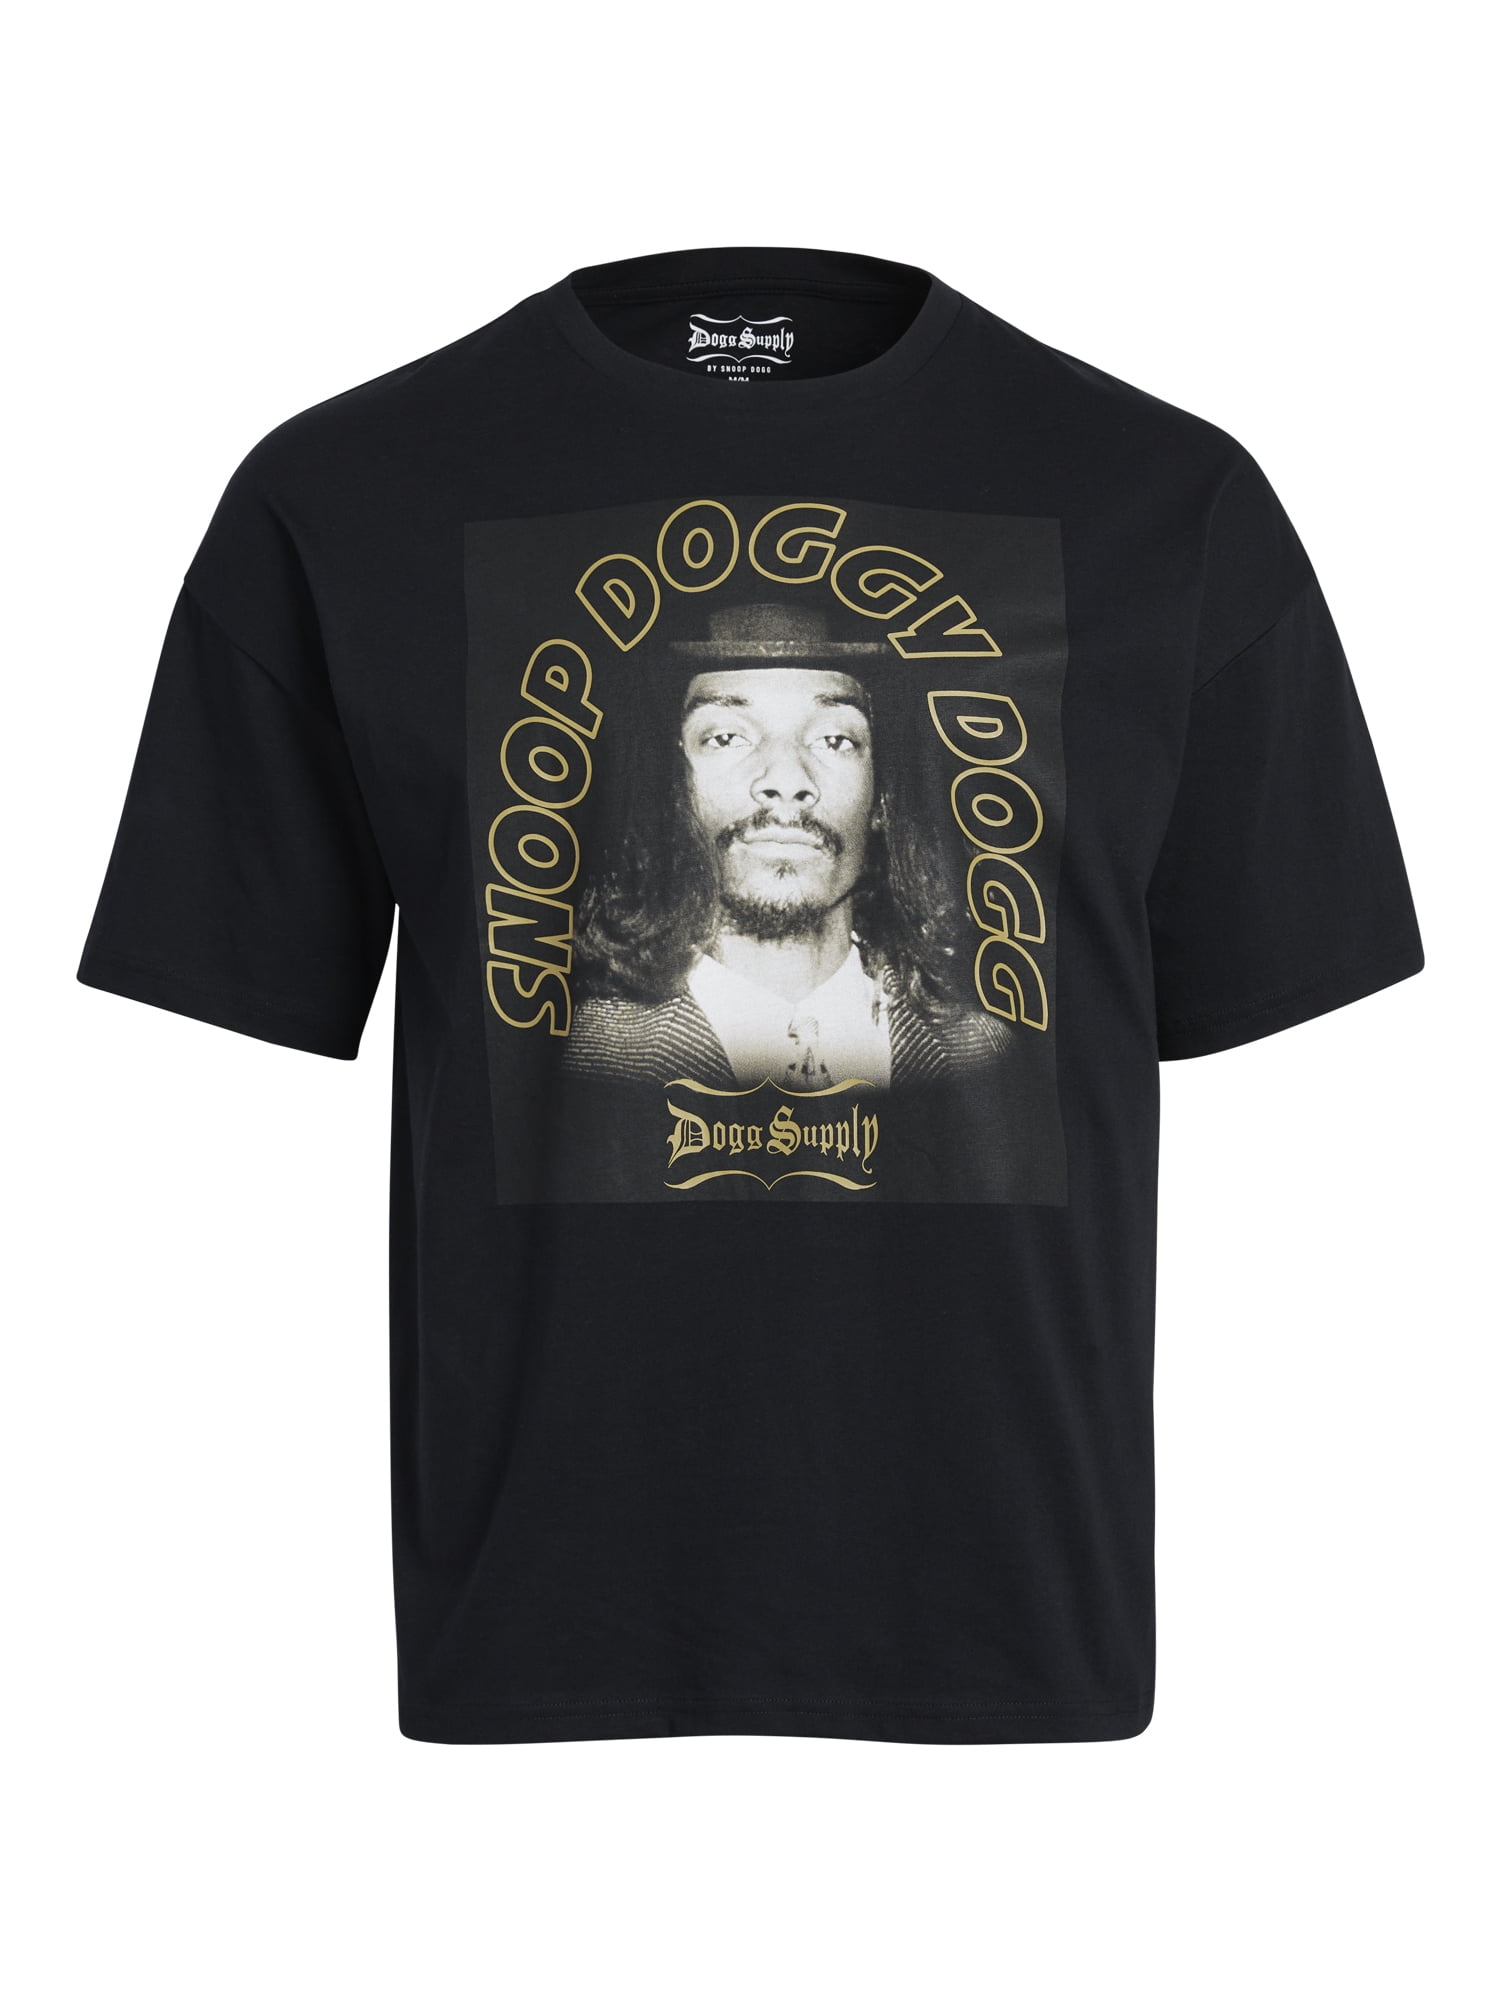 Dogg Supply by Snoop Dog T- Shirts Size Small Chest 18 in L 26.5 in